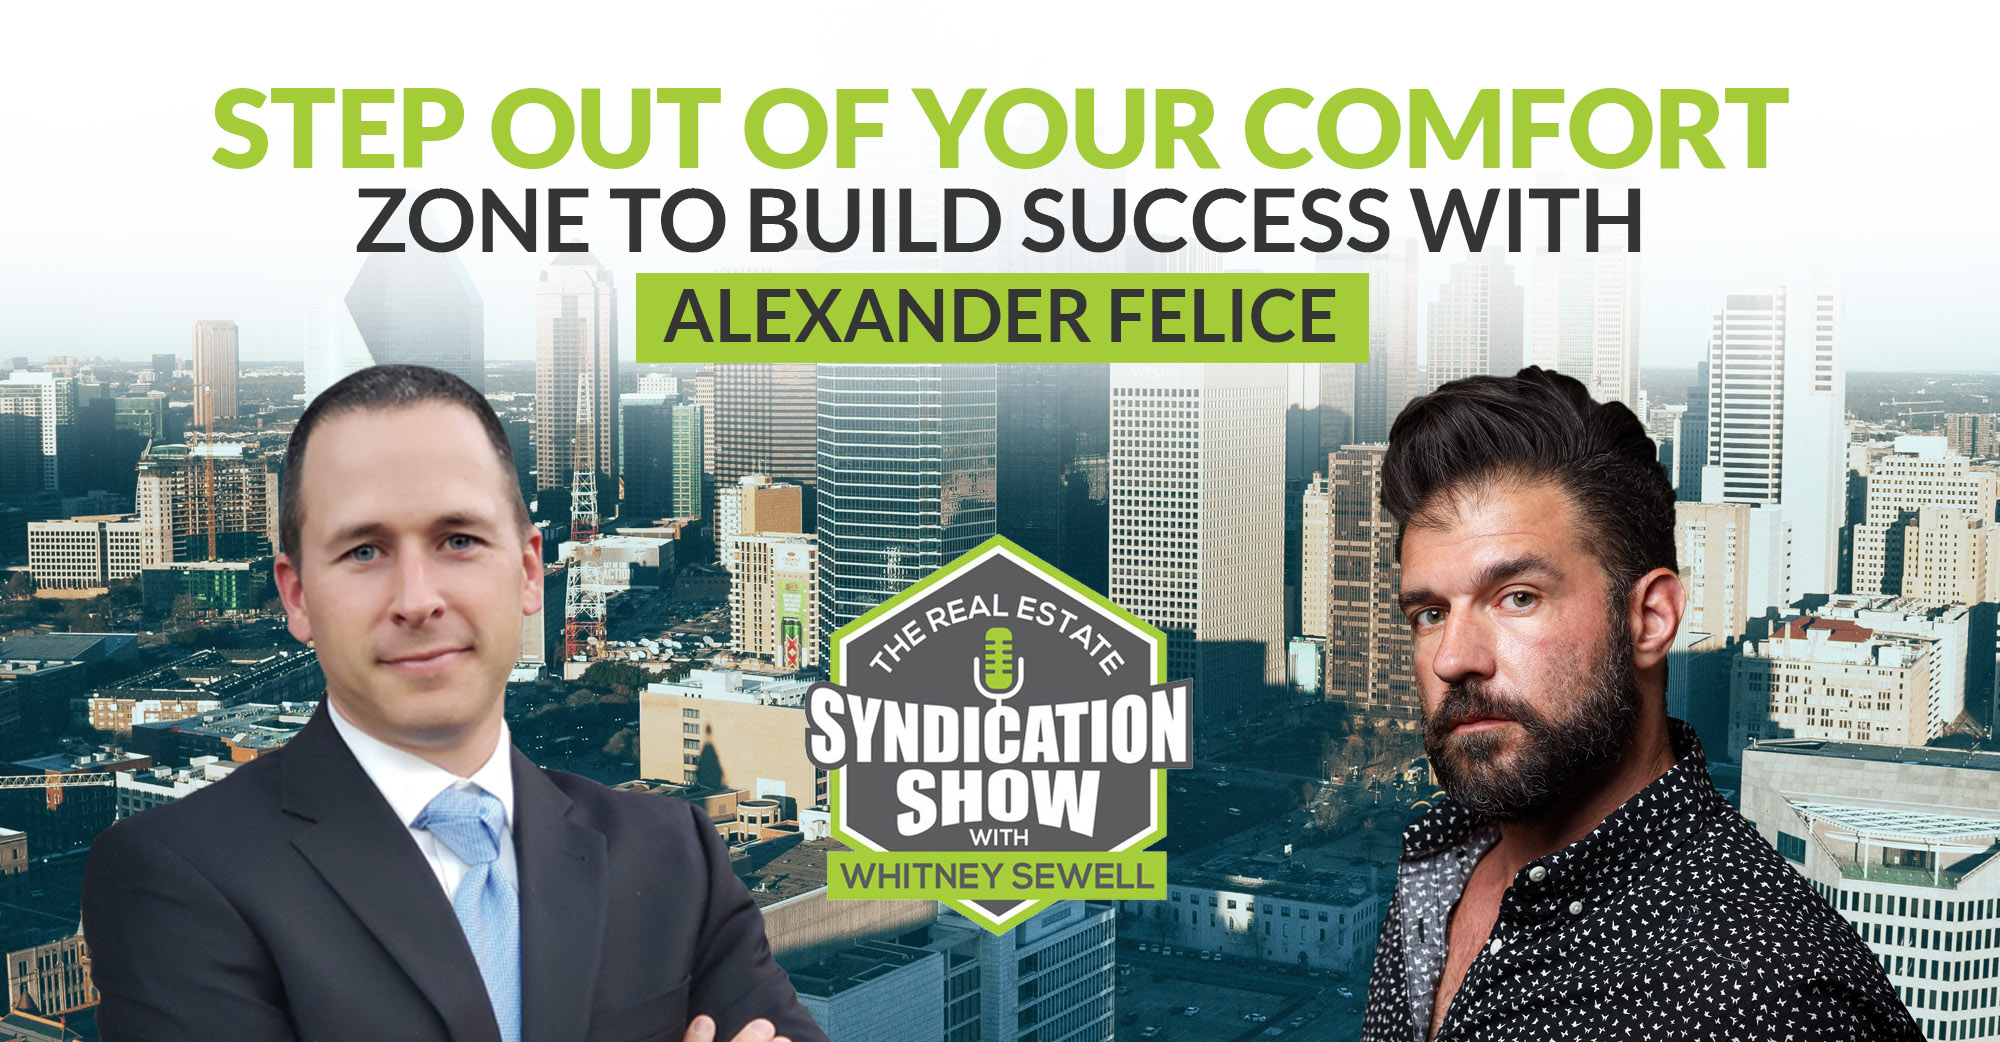 Step Out of Your Comfort Zone to Build Success with Alexander Felice